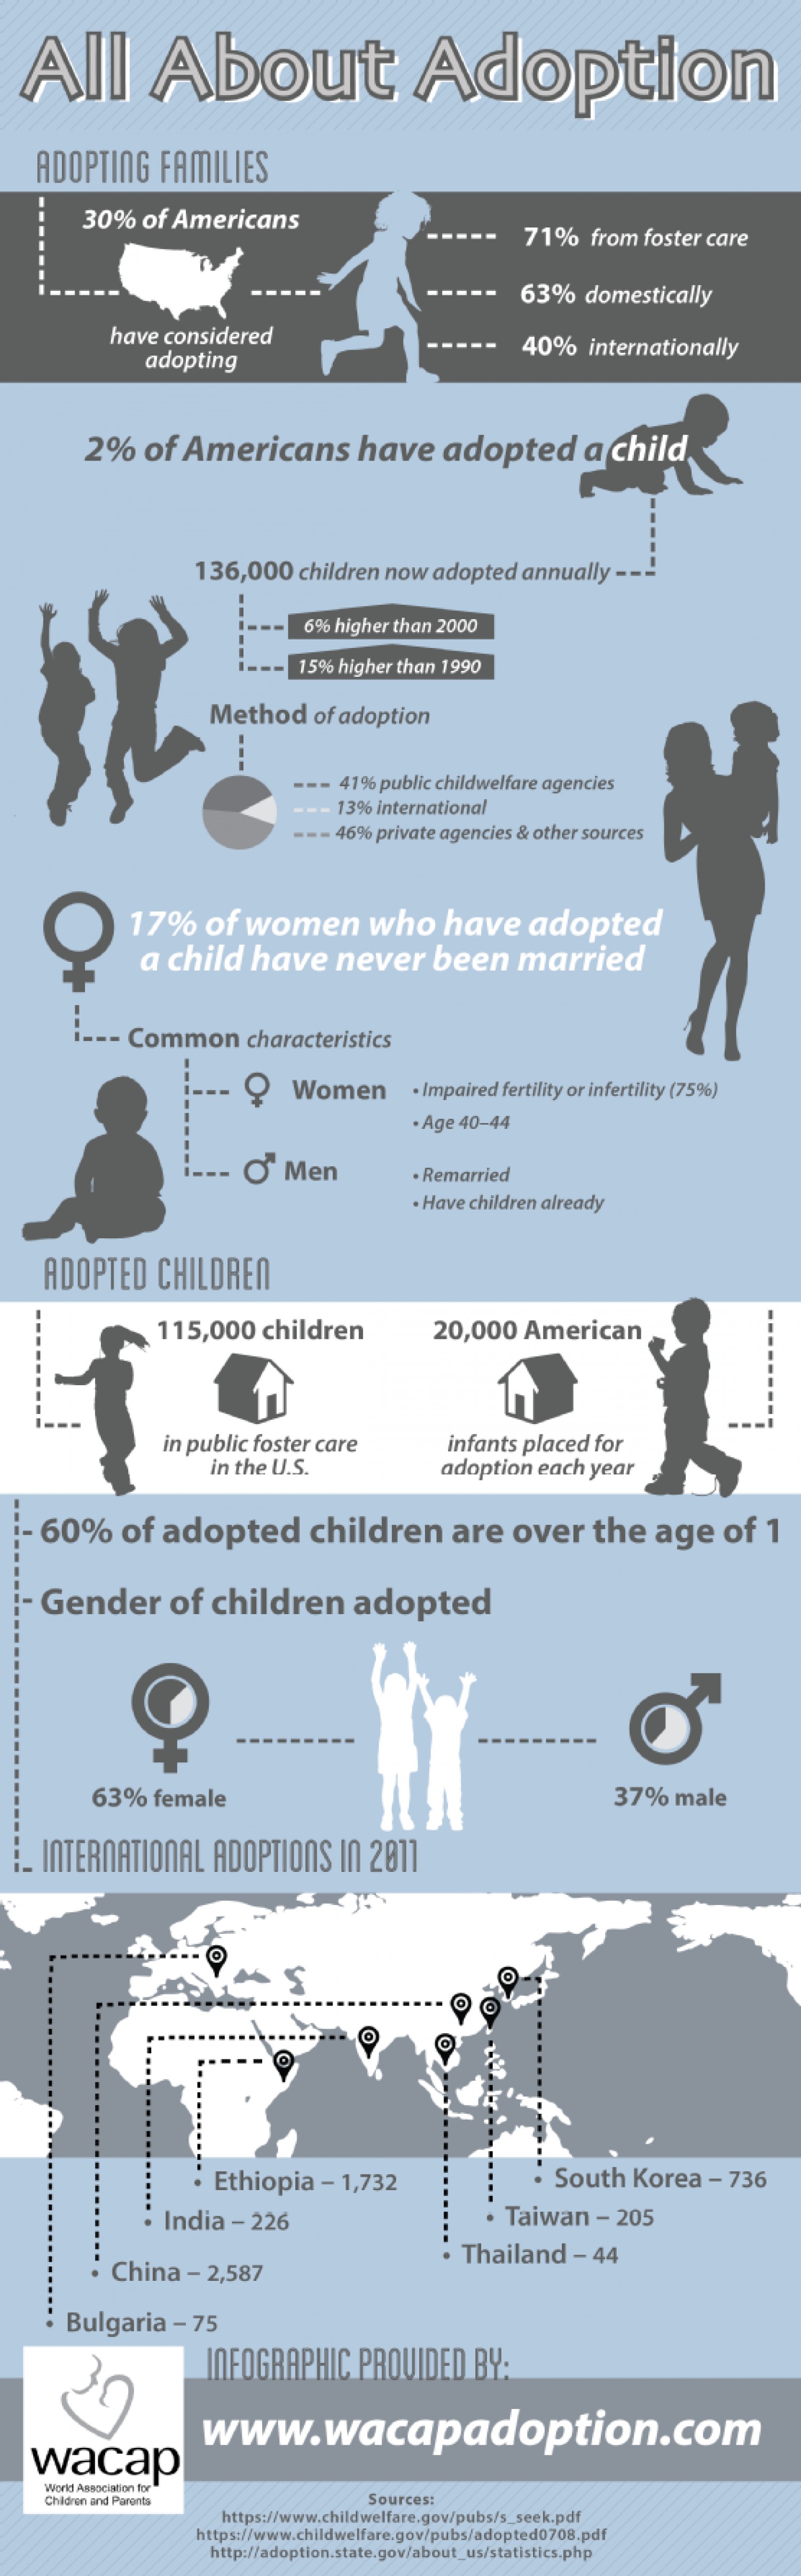 All about adoption